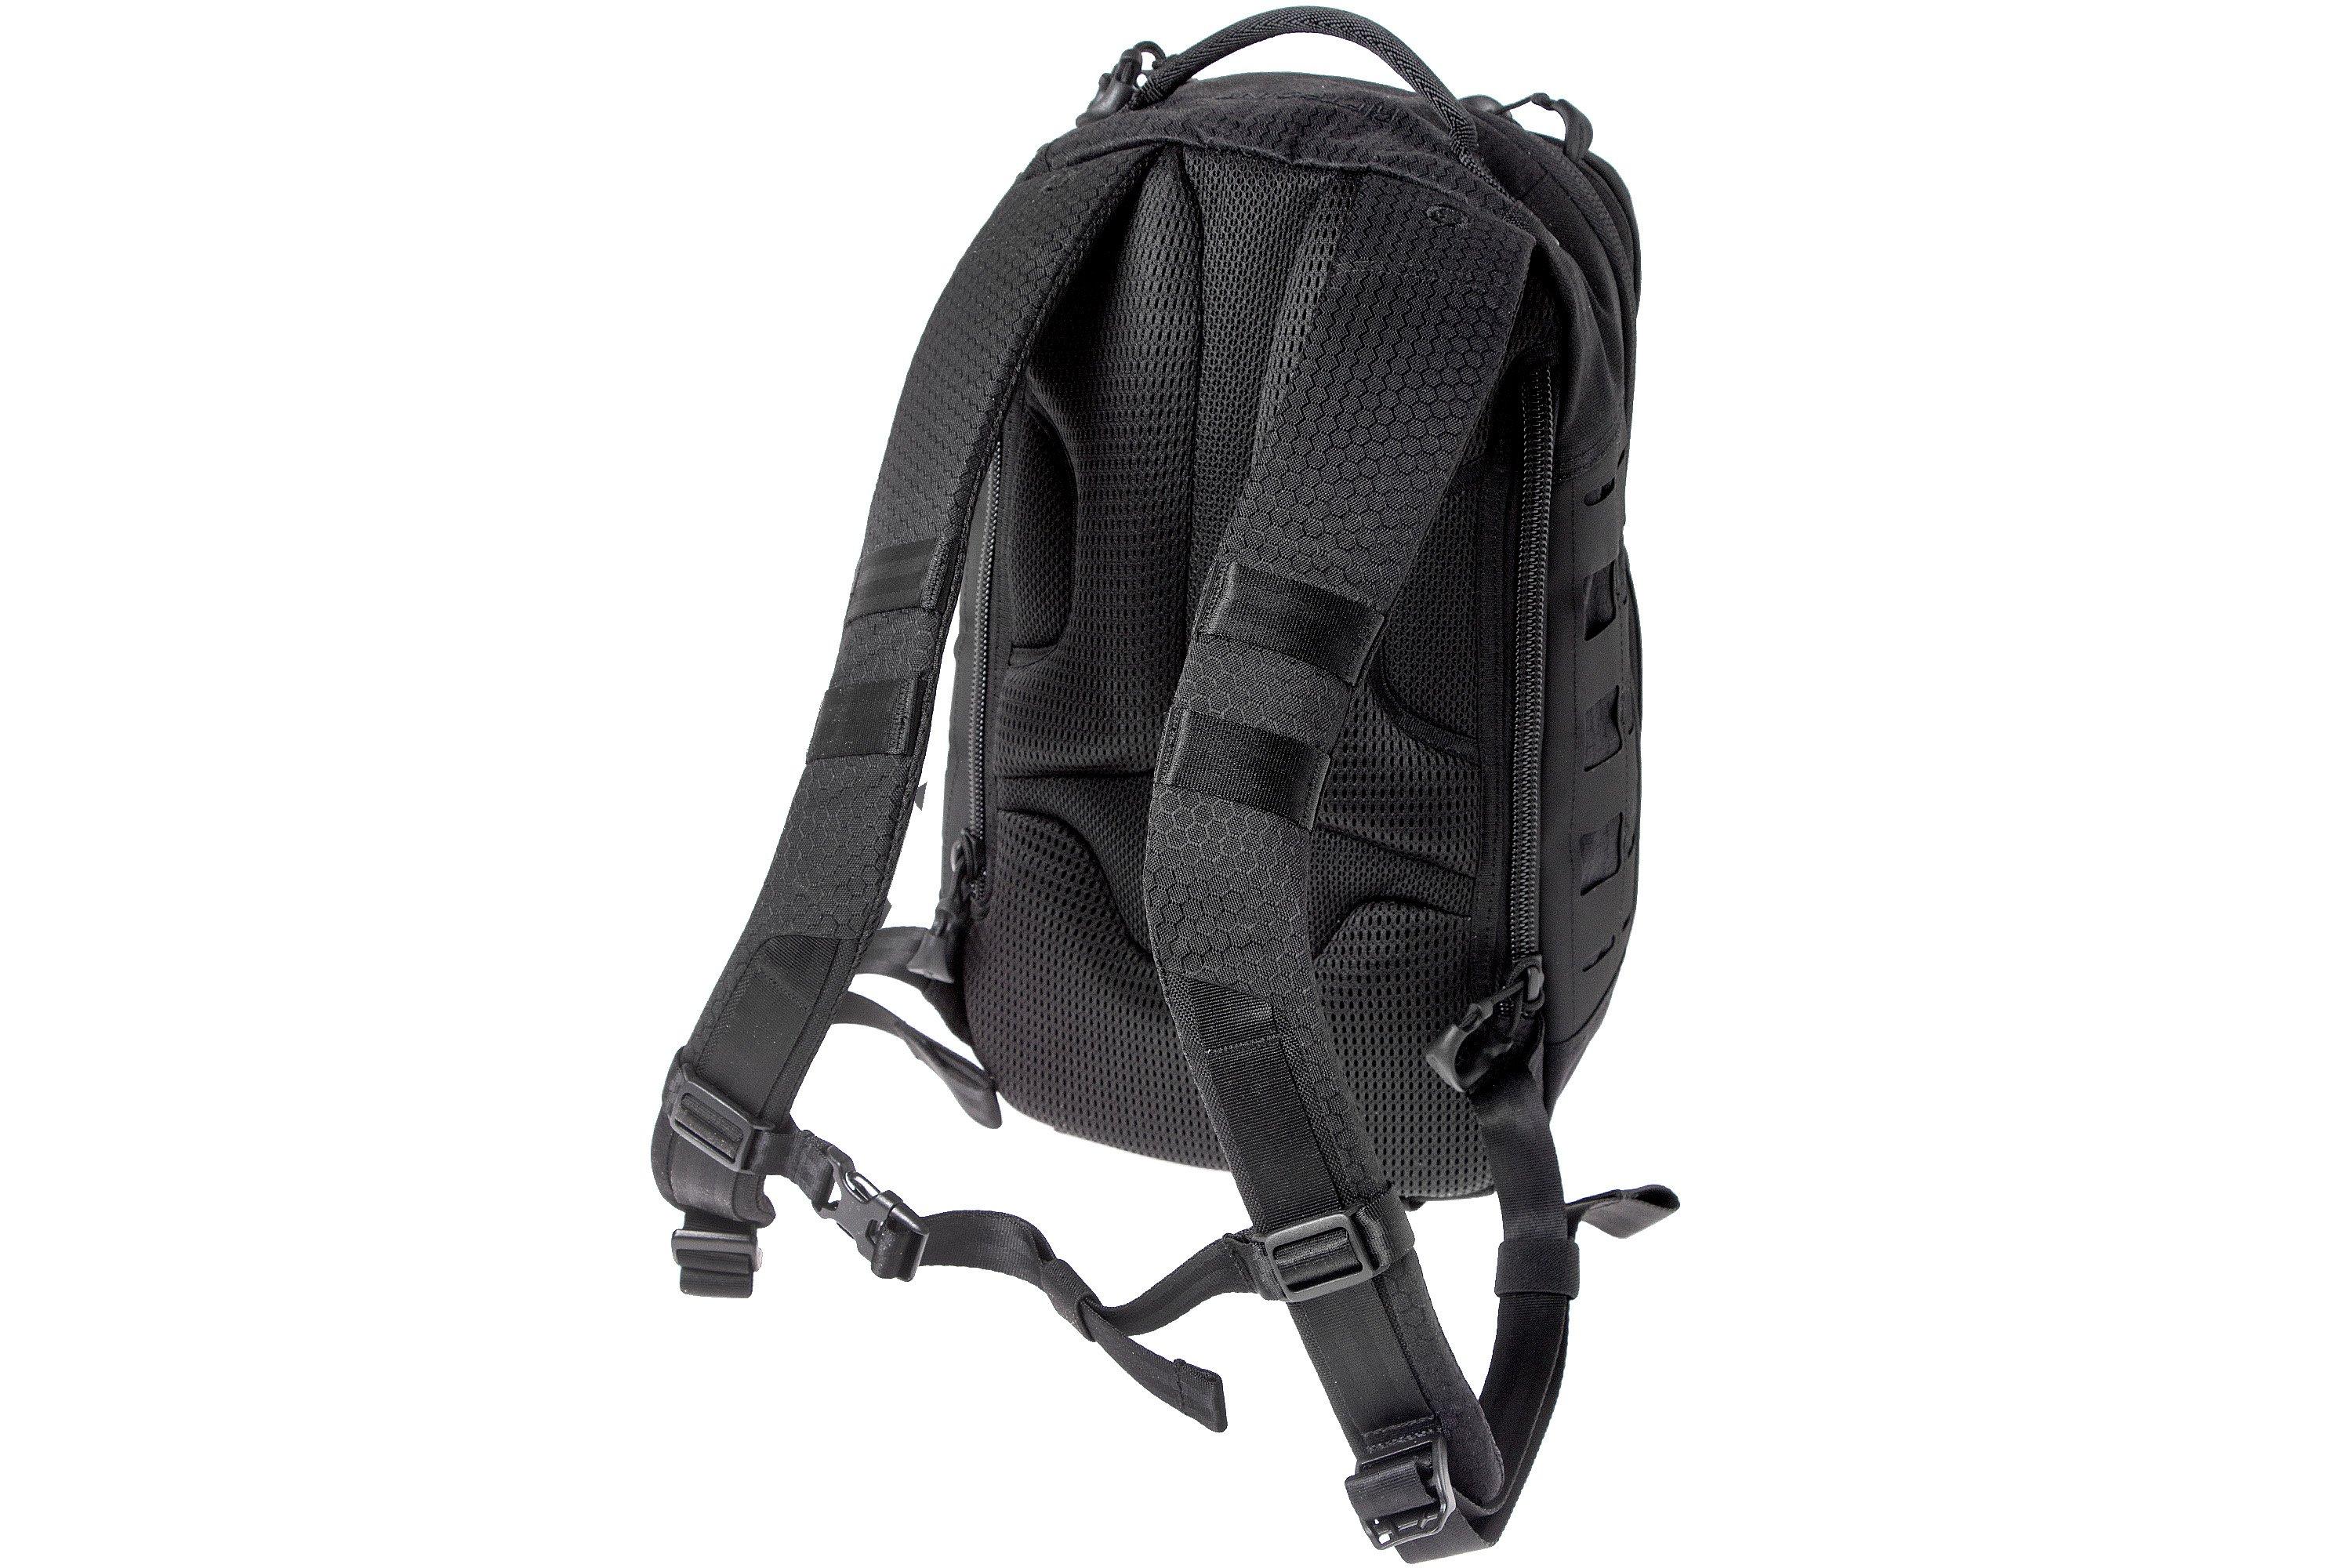 Maxpedition Riftpoint Backpack Black 15L RPTBLK, tactical backpack AGR  Advantageously shopping at